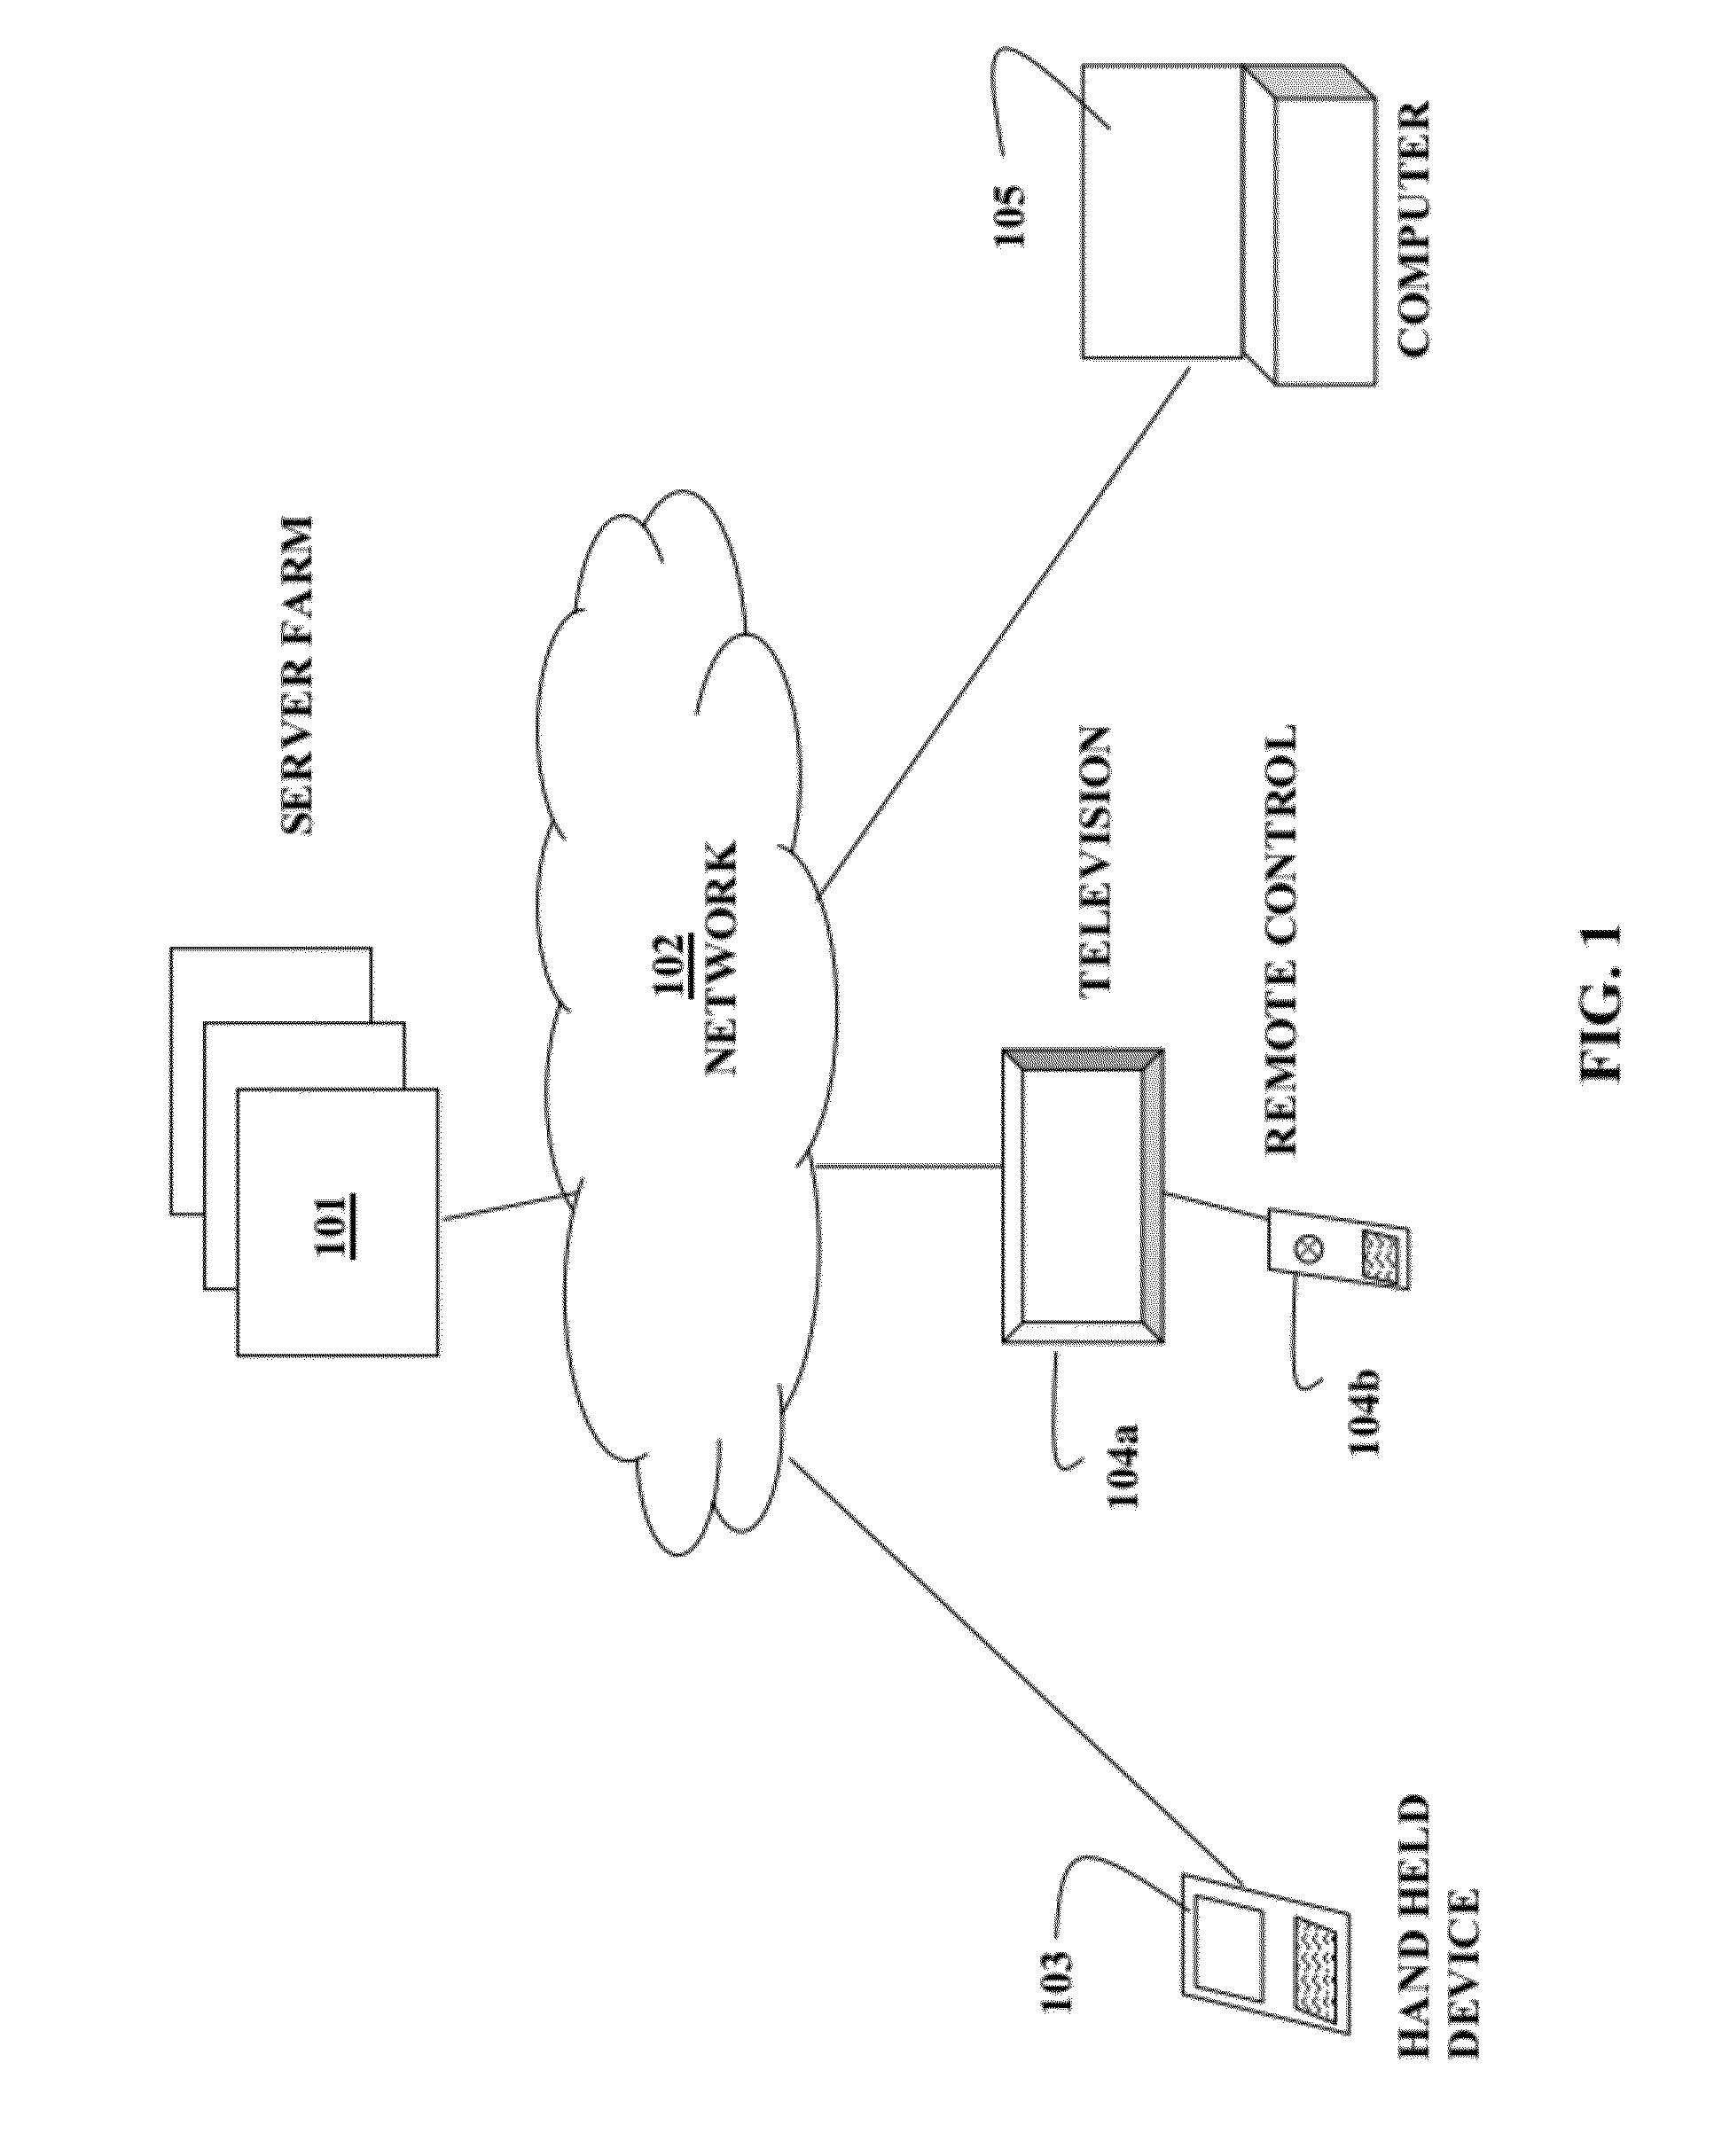 Method and System for Incremental Search with Reduced Text Entry Where the Relevance of Results is a Dynamically Computed Function of User Input Search String Character Count